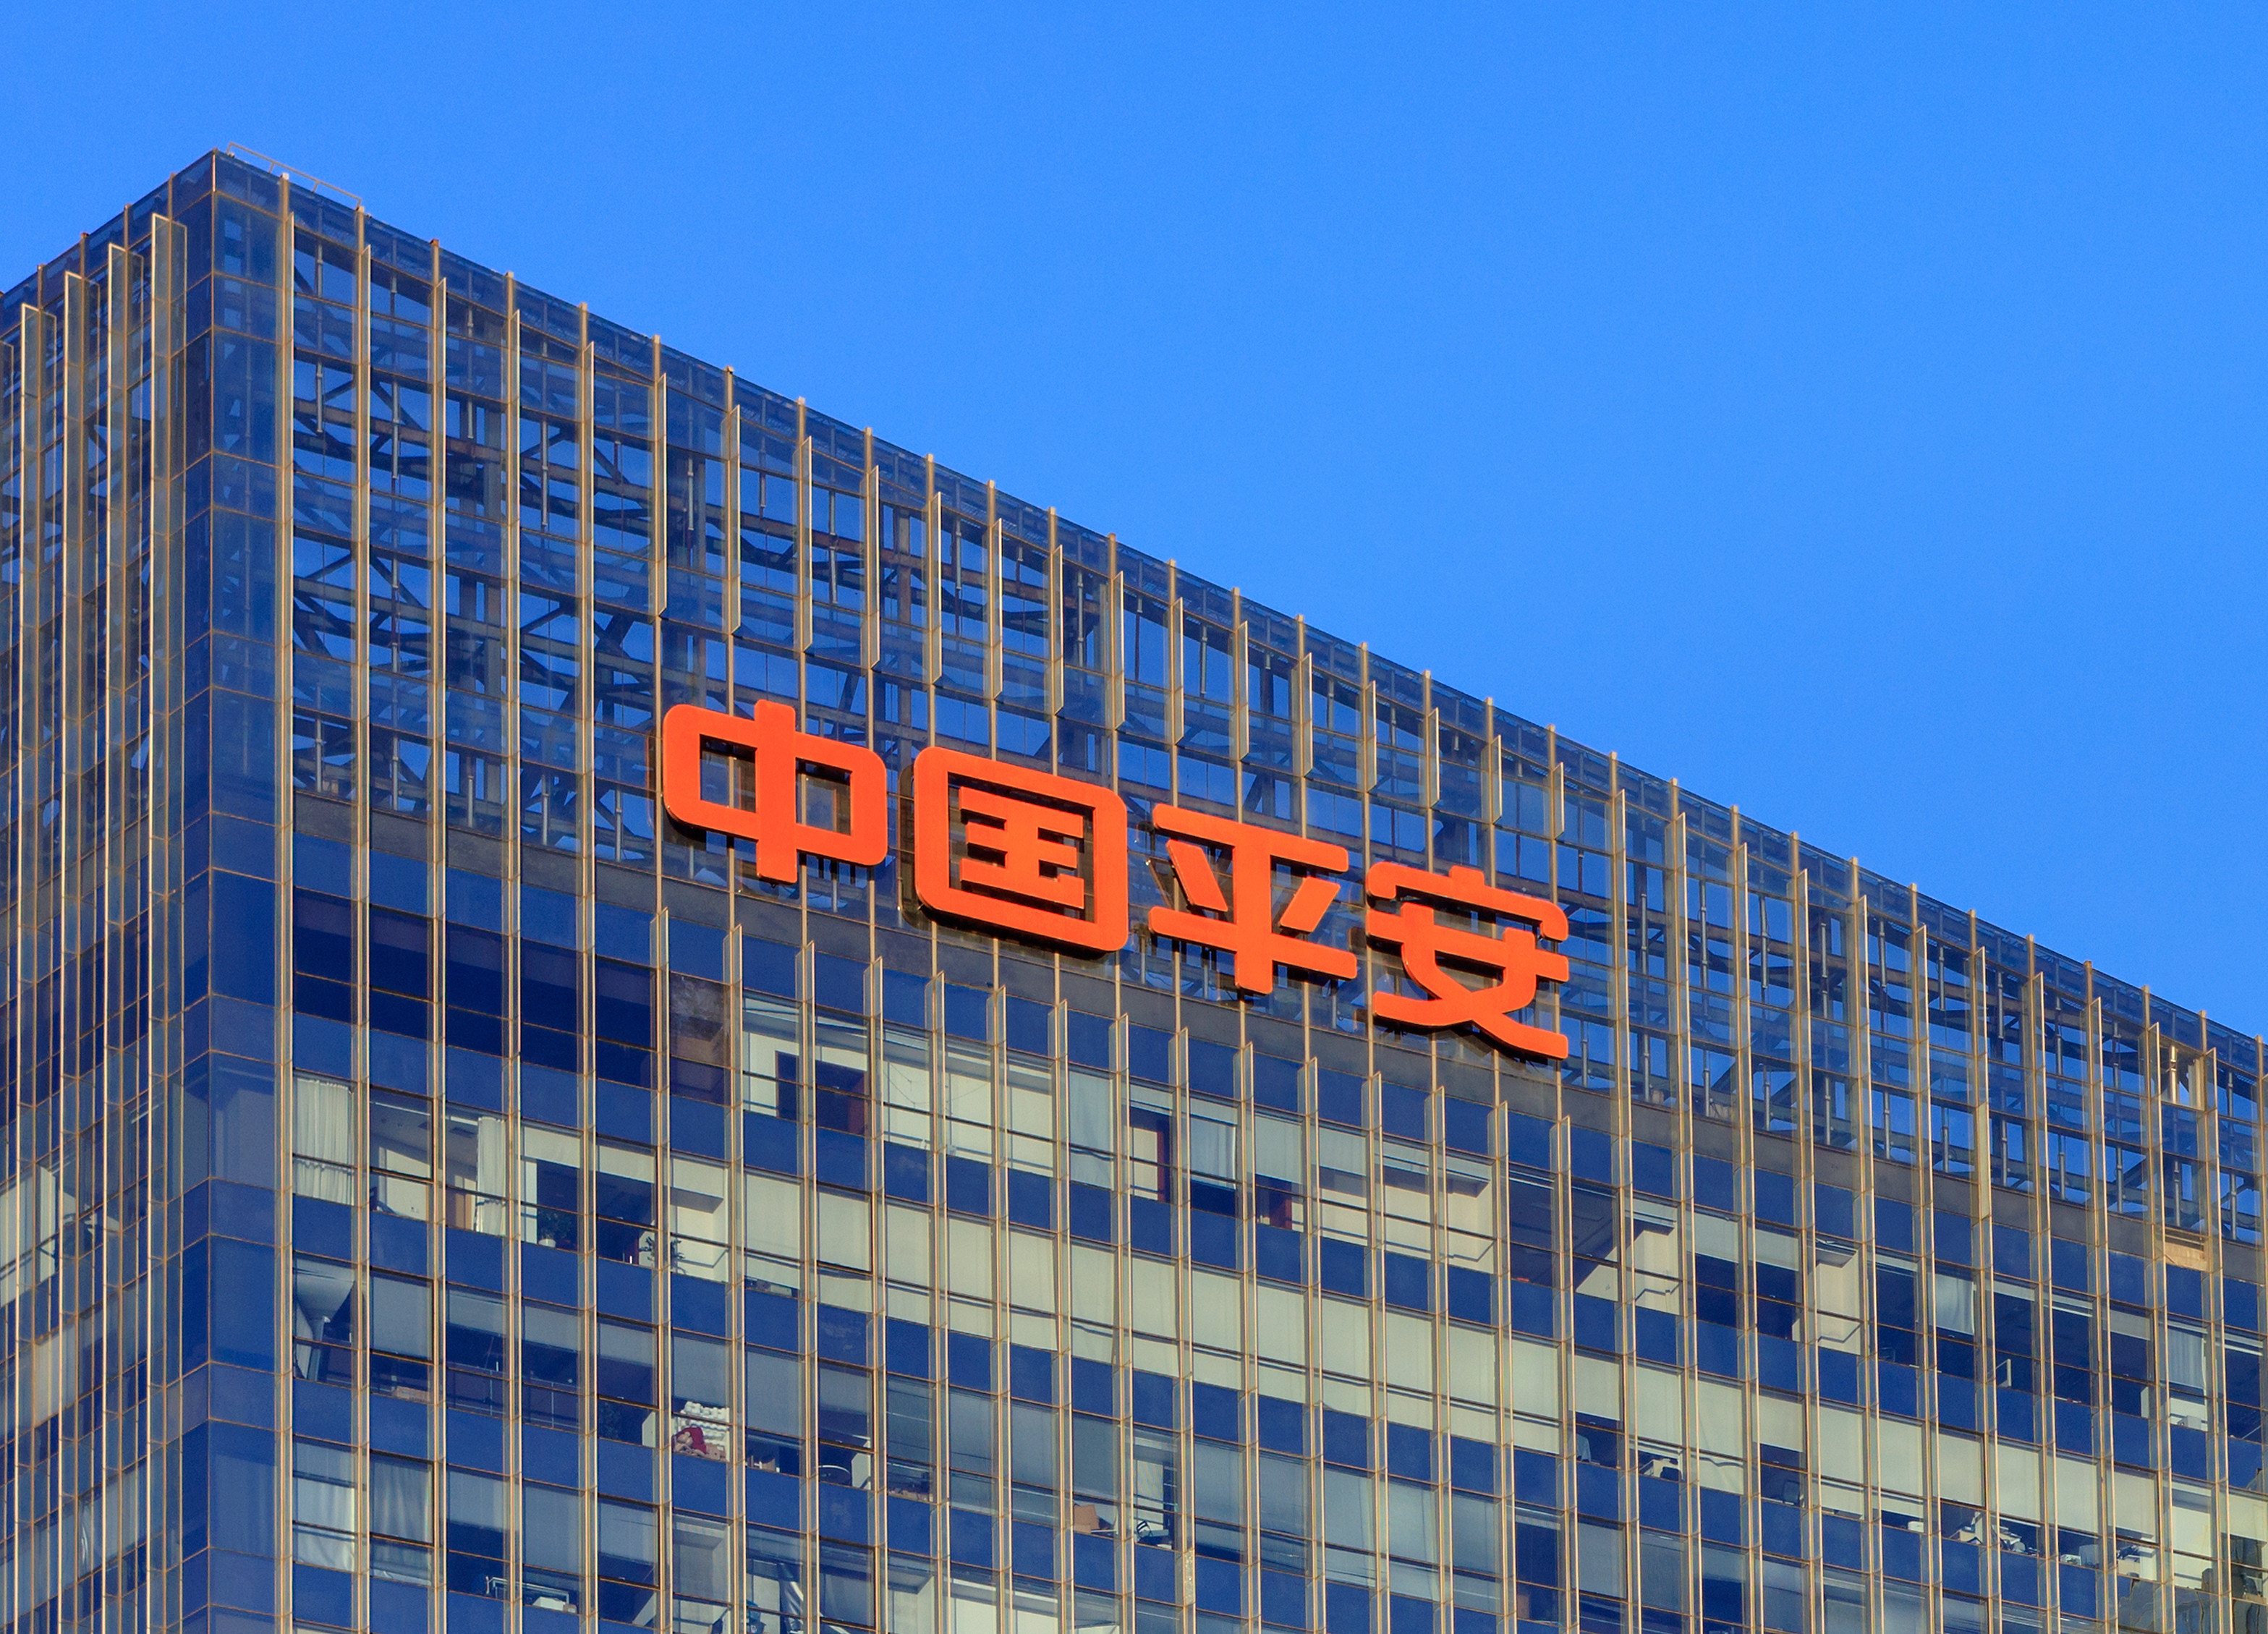 Ping An denies reports it will take over Country Garden and assume its debts. Photo: Shutterstock